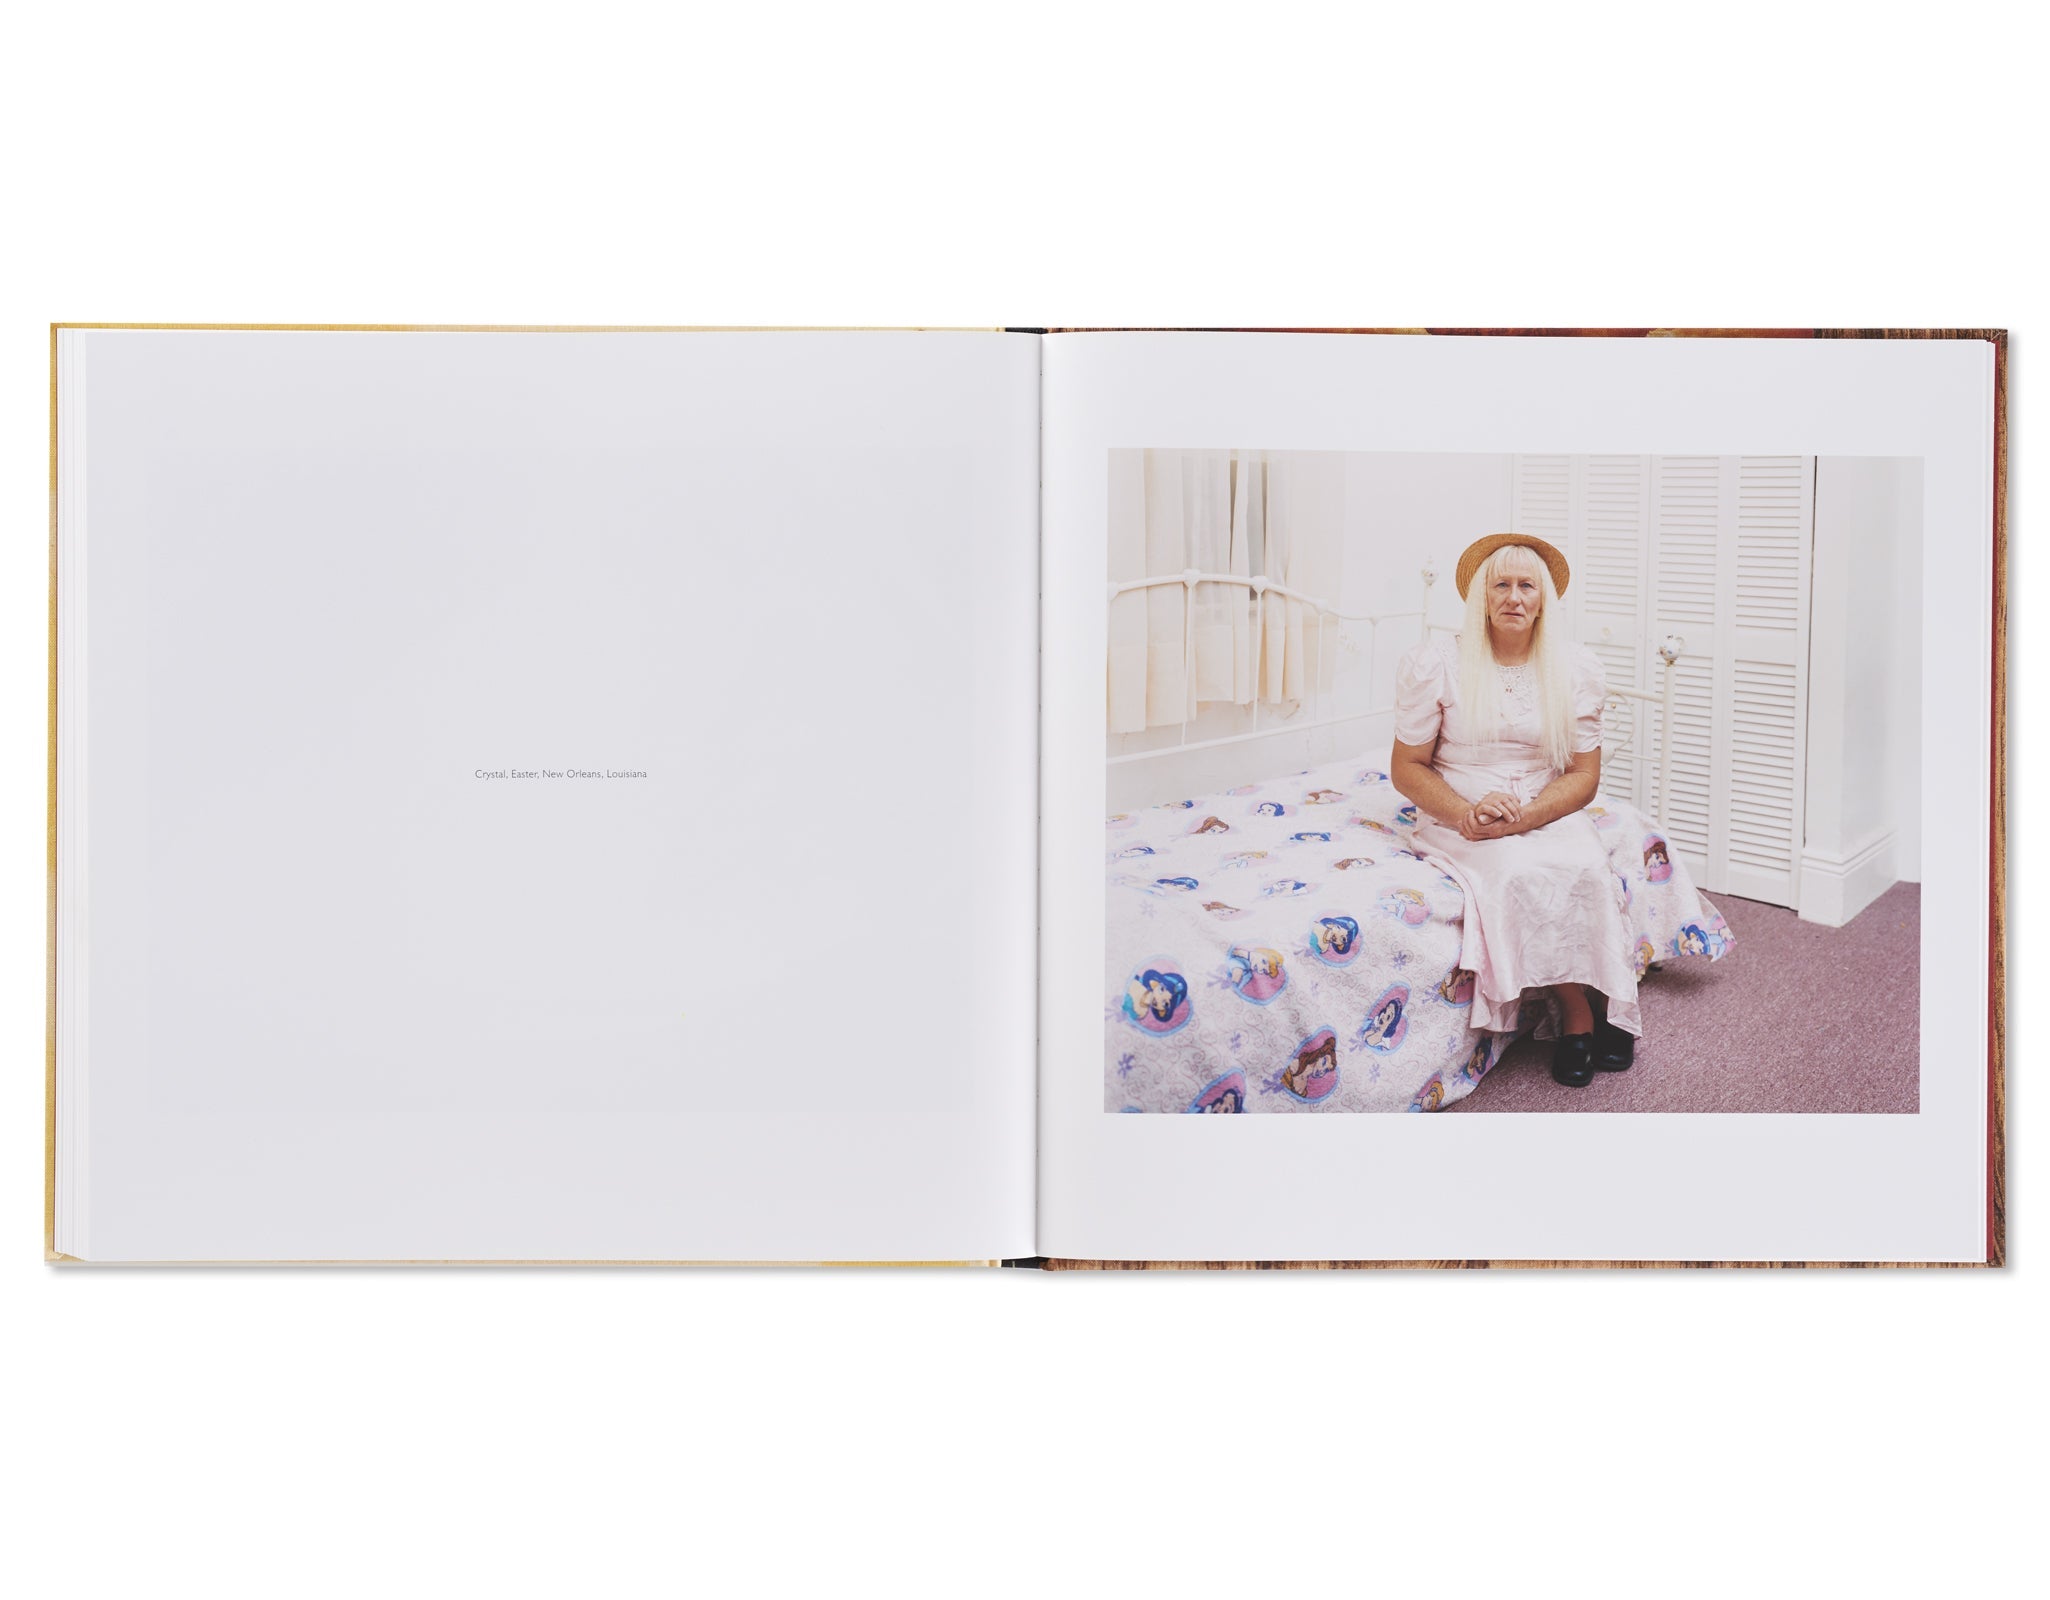 SLEEPING BY THE MISSISSIPPI by Alec Soth